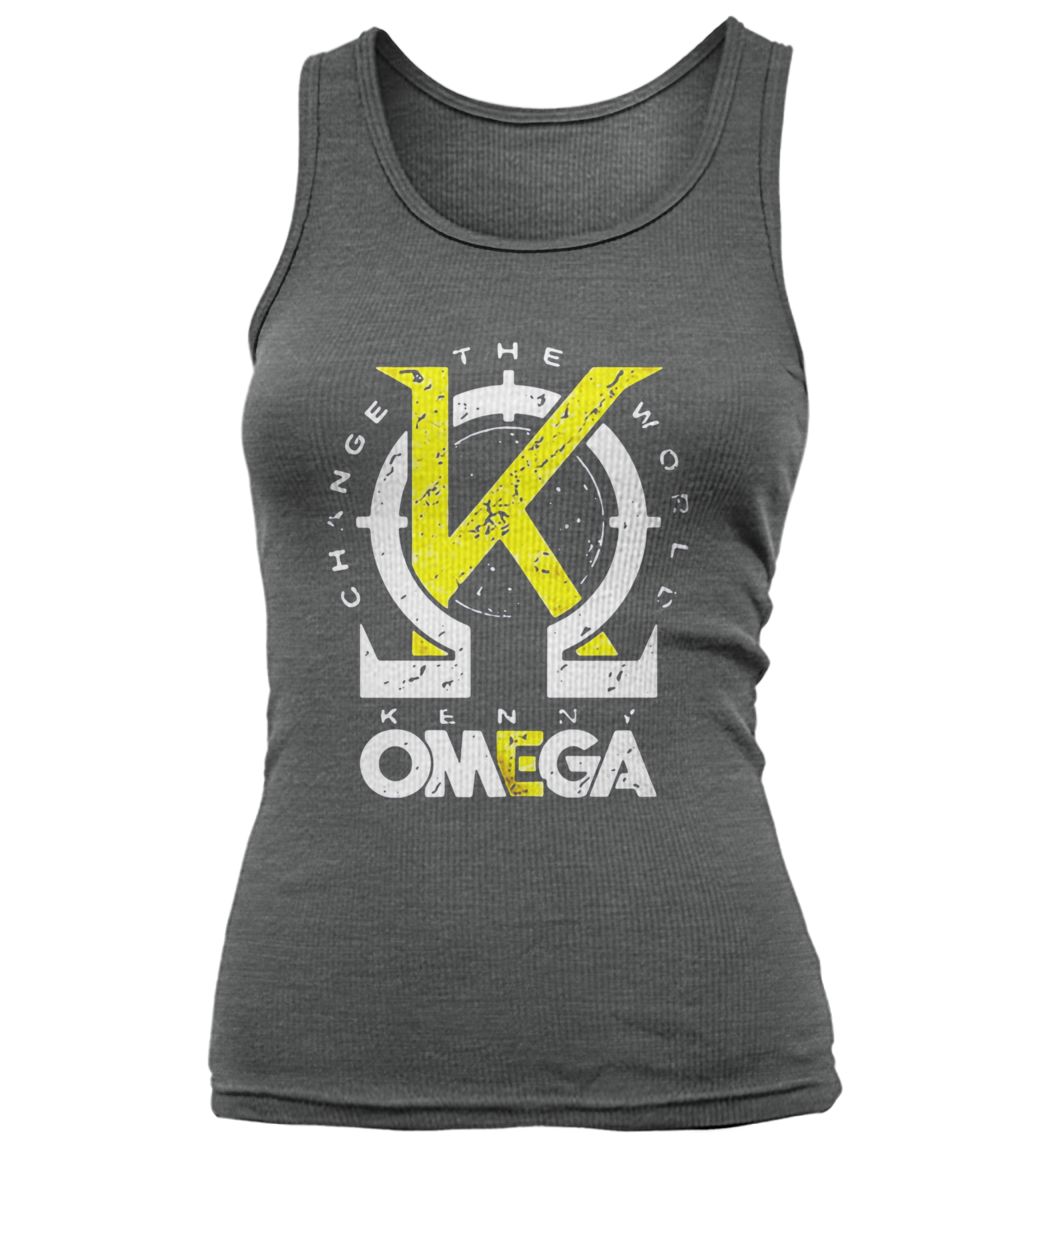 Kenny omega change the world women's tank top